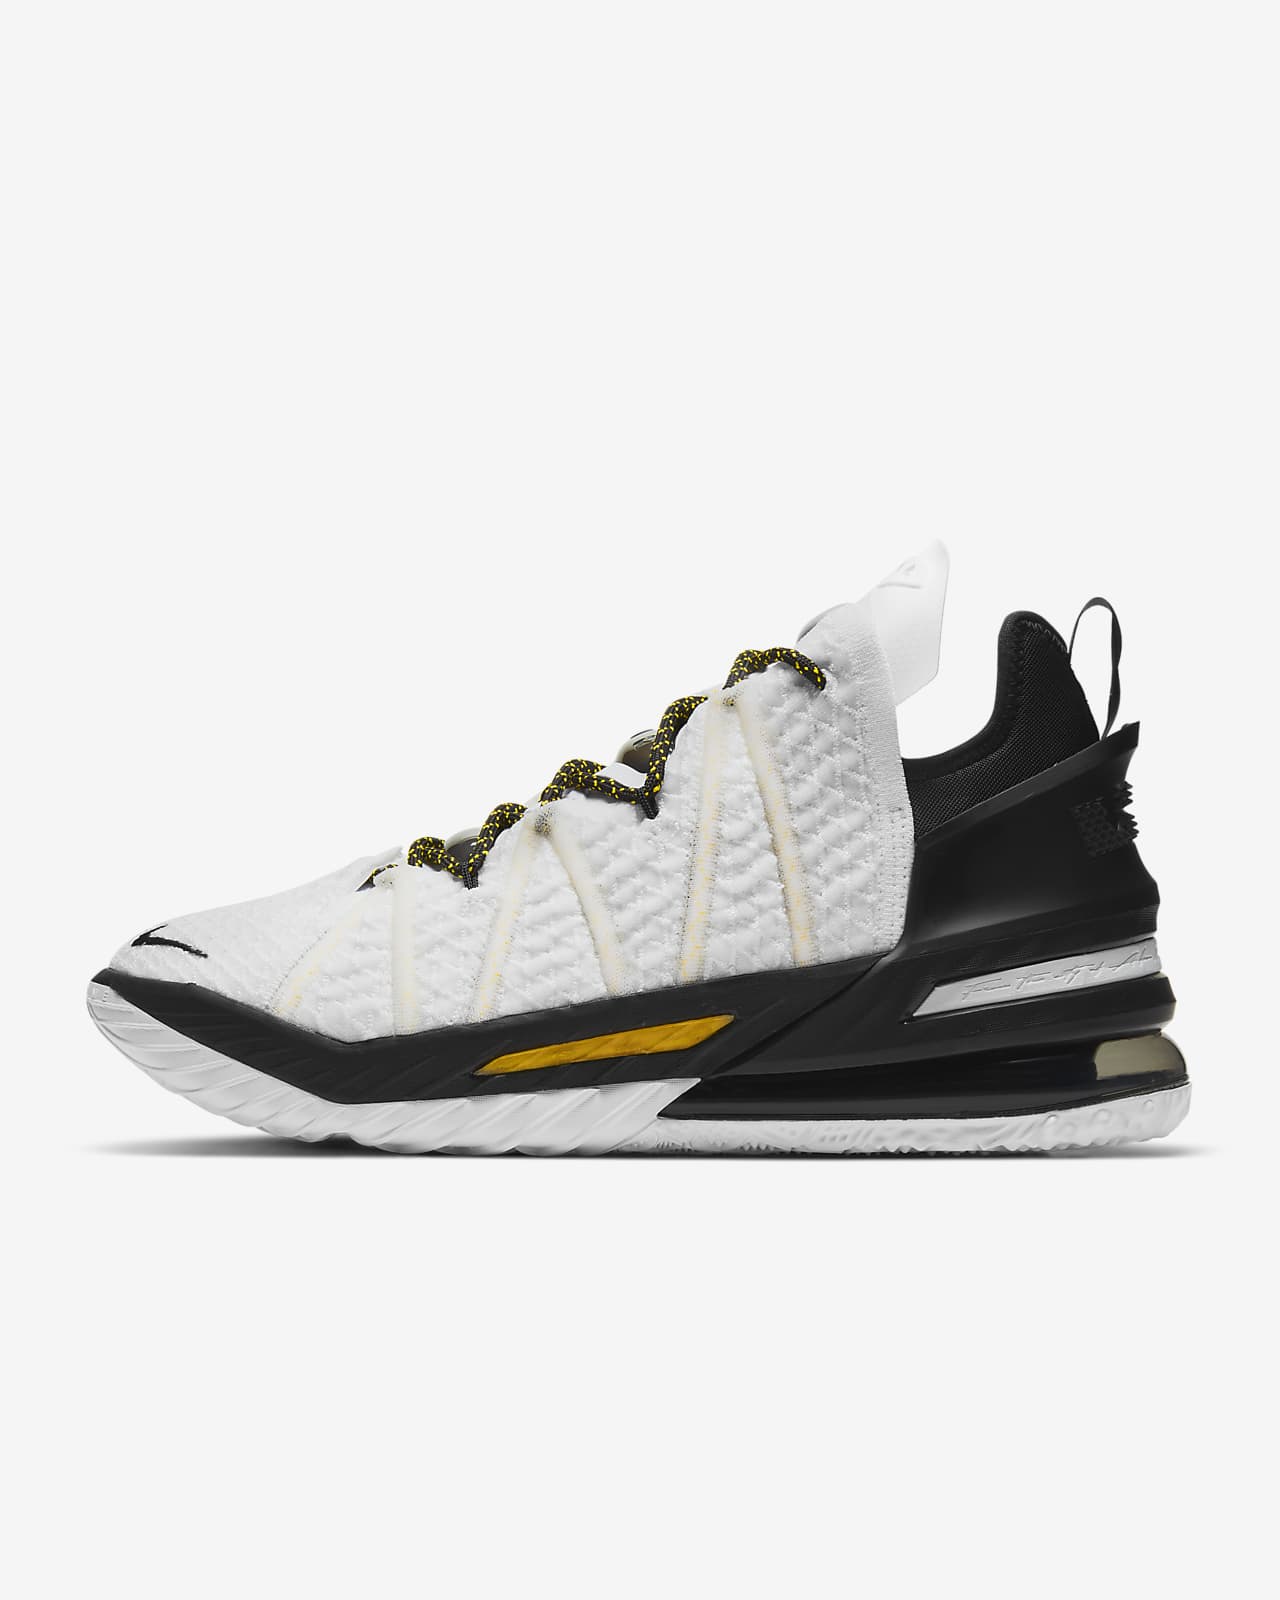 lebron white and black shoes